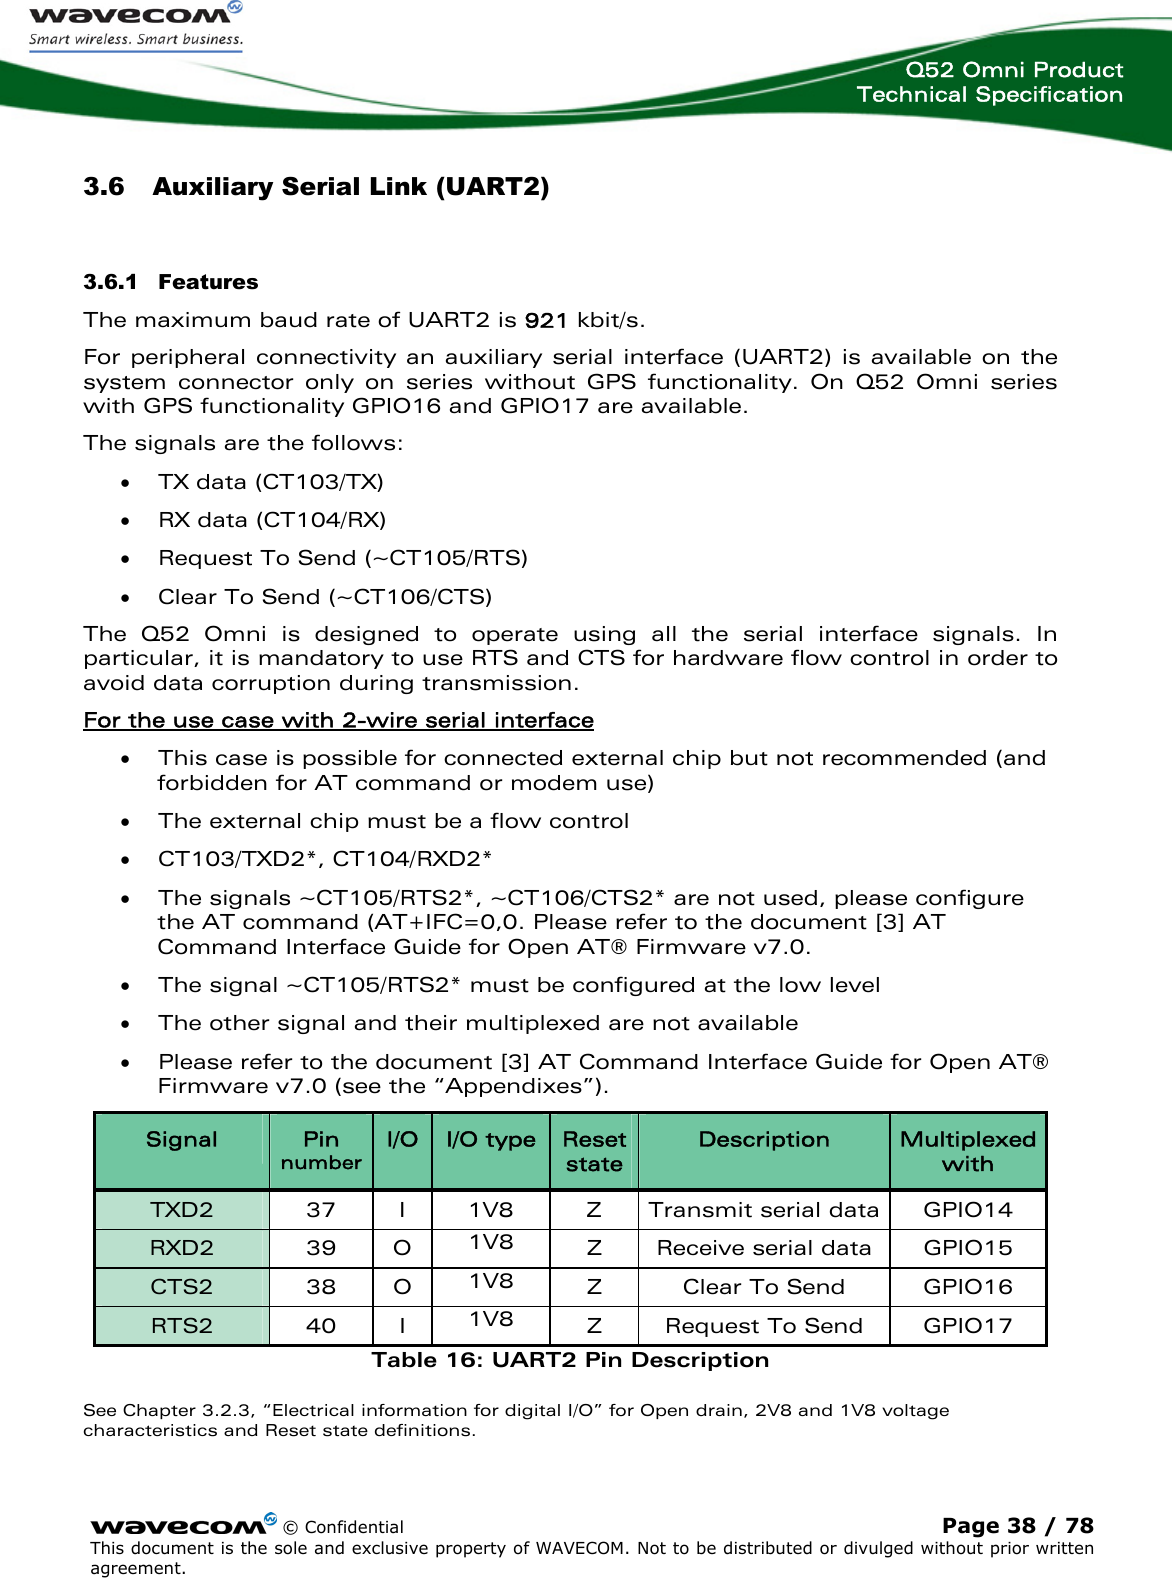  Q52 Omni Product Technical Specification   3.6 Auxiliary Serial Link (UART2) 3.6.1 Features The maximum baud rate of UART2 is 921 kbit/s. For peripheral connectivity an auxiliary serial interface (UART2) is available on the system connector only on series without GPS functionality. On Q52 Omni series with GPS functionality GPIO16 and GPIO17 are available. The signals are the follows: • TX data (CT103/TX) • RX data (CT104/RX) • Request To Send (~CT105/RTS) • Clear To Send (~CT106/CTS) The Q52 Omni is designed to operate using all the serial interface signals. In particular, it is mandatory to use RTS and CTS for hardware flow control in order to avoid data corruption during transmission. For the use case with 2-wire serial interface  • This case is possible for connected external chip but not recommended (and forbidden for AT command or modem use)  • The external chip must be a flow control • CT103/TXD2*, CT104/RXD2* • The signals ~CT105/RTS2*, ~CT106/CTS2* are not used, please configure the AT command (AT+IFC=0,0. Please refer to the document [3] AT Command Interface Guide for Open AT® Firmware v7.0. • The signal ~CT105/RTS2* must be configured at the low level • The other signal and their multiplexed are not available • Please refer to the document [3] AT Command Interface Guide for Open AT® Firmware v7.0 (see the “Appendixes”). Signal  Pin number I/O  I/O type  Reset state Description  Multiplexed with TXD2  37  I  1V8  Z  Transmit serial data  GPIO14 RXD2 39 O 1V8  Z  Receive serial data  GPIO15 CTS2 38 O 1V8  Z  Clear To Send  GPIO16 RTS2   40  I  1V8  Z  Request To Send  GPIO17 Table 16: UART2 Pin Description See Chapter 3.2.3, “Electrical information for digital I/O” for Open drain, 2V8 and 1V8 voltage characteristics and Reset state definitions.  © Confidential Page 38 / 78 This document is the sole and exclusive property of WAVECOM. Not to be distributed or divulged without prior written agreement.  